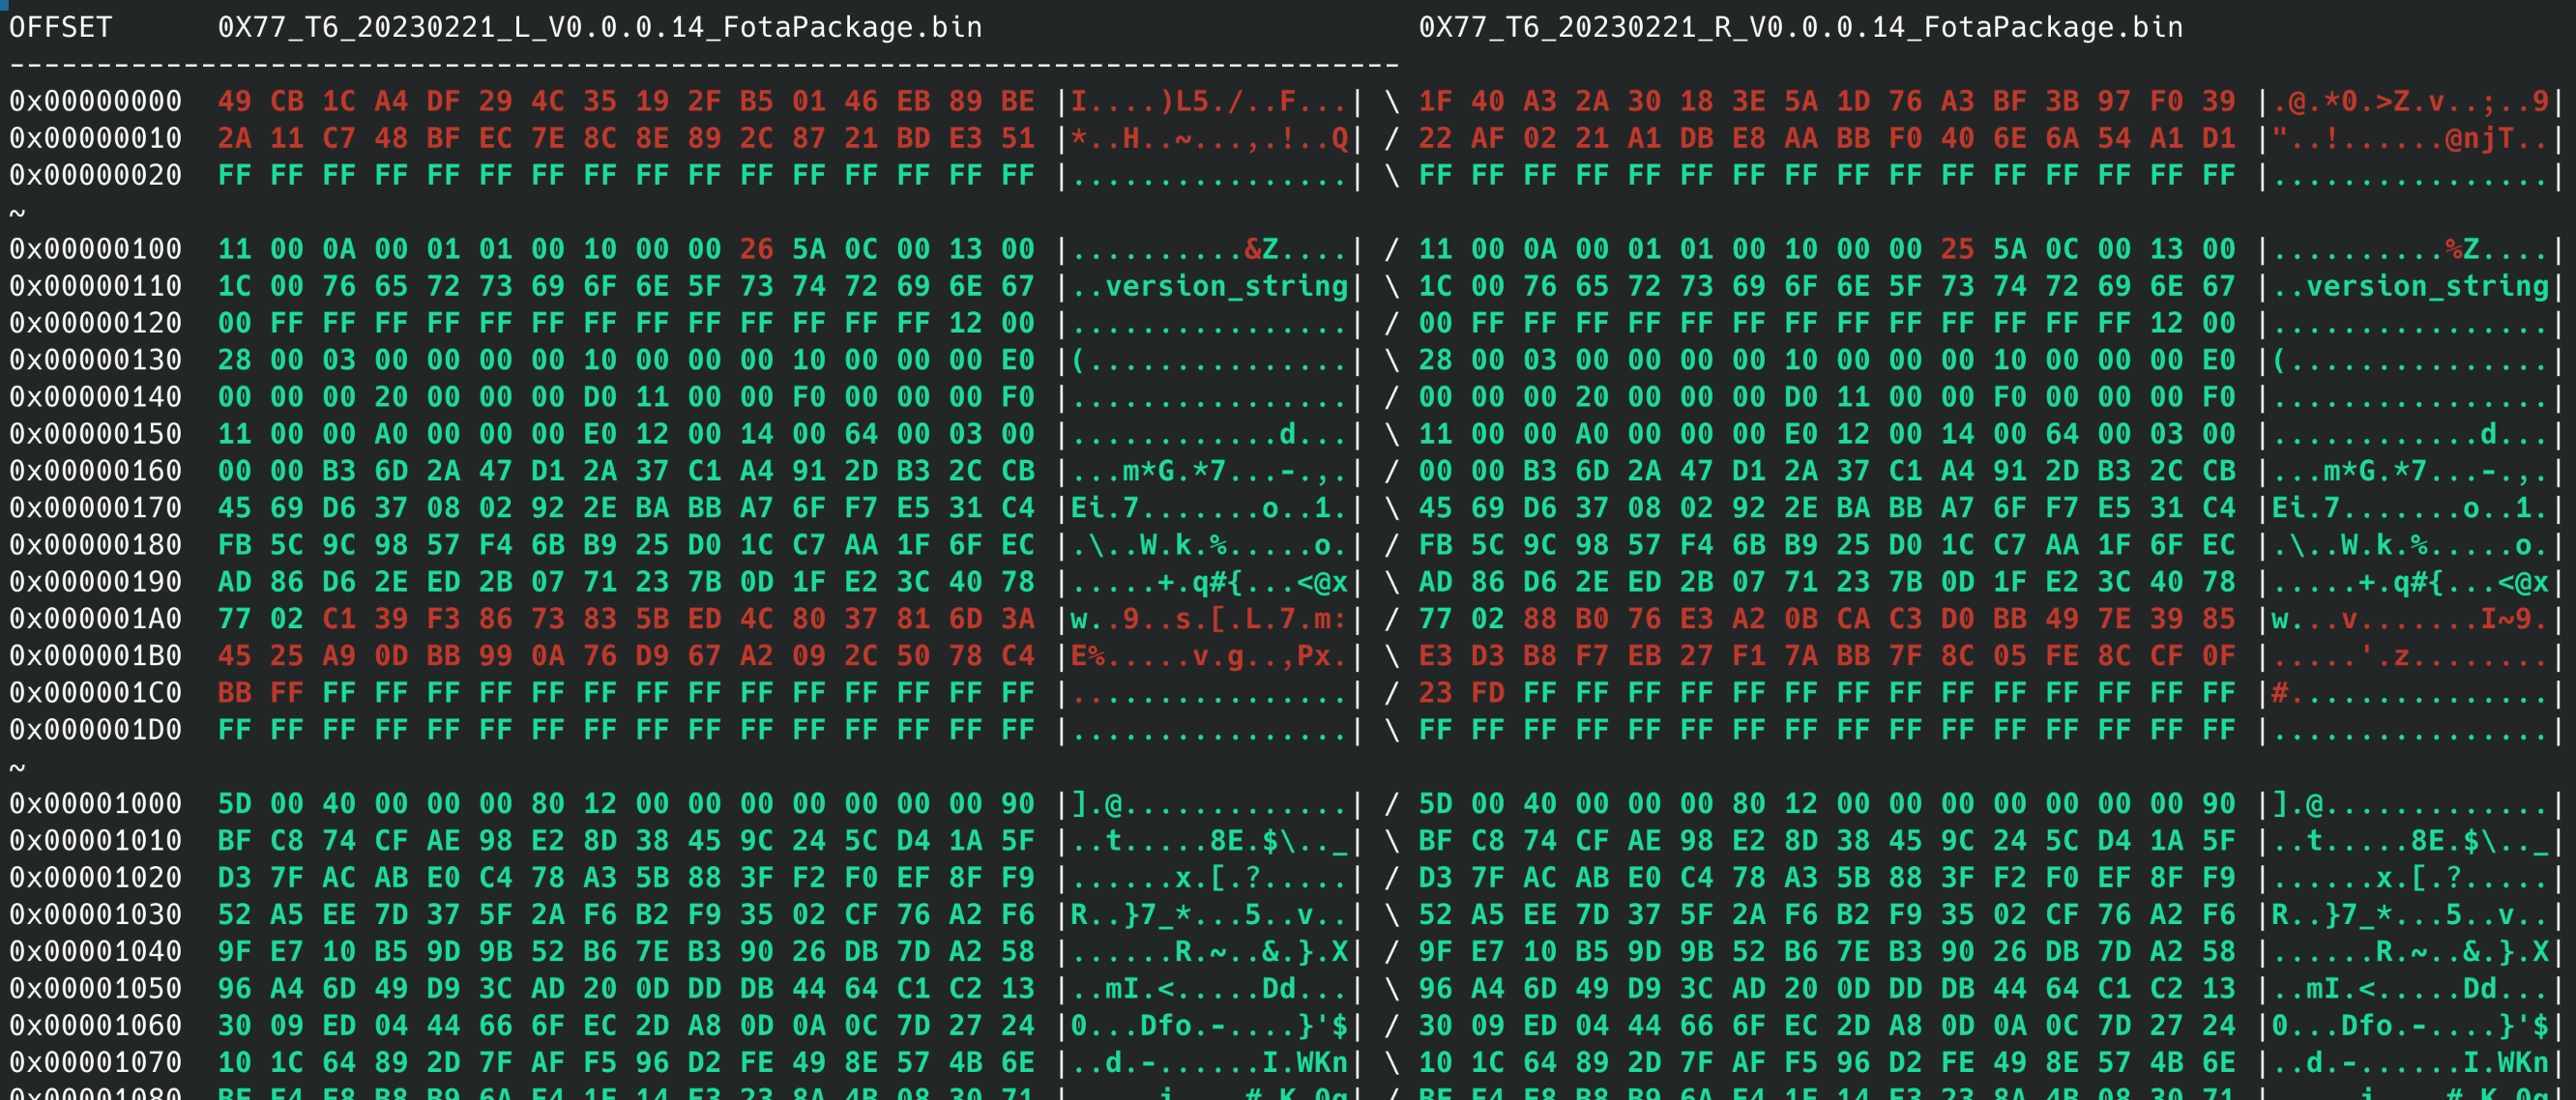 The header (0x00-0x1000) appears to be unencrypted and only differs in small segments.